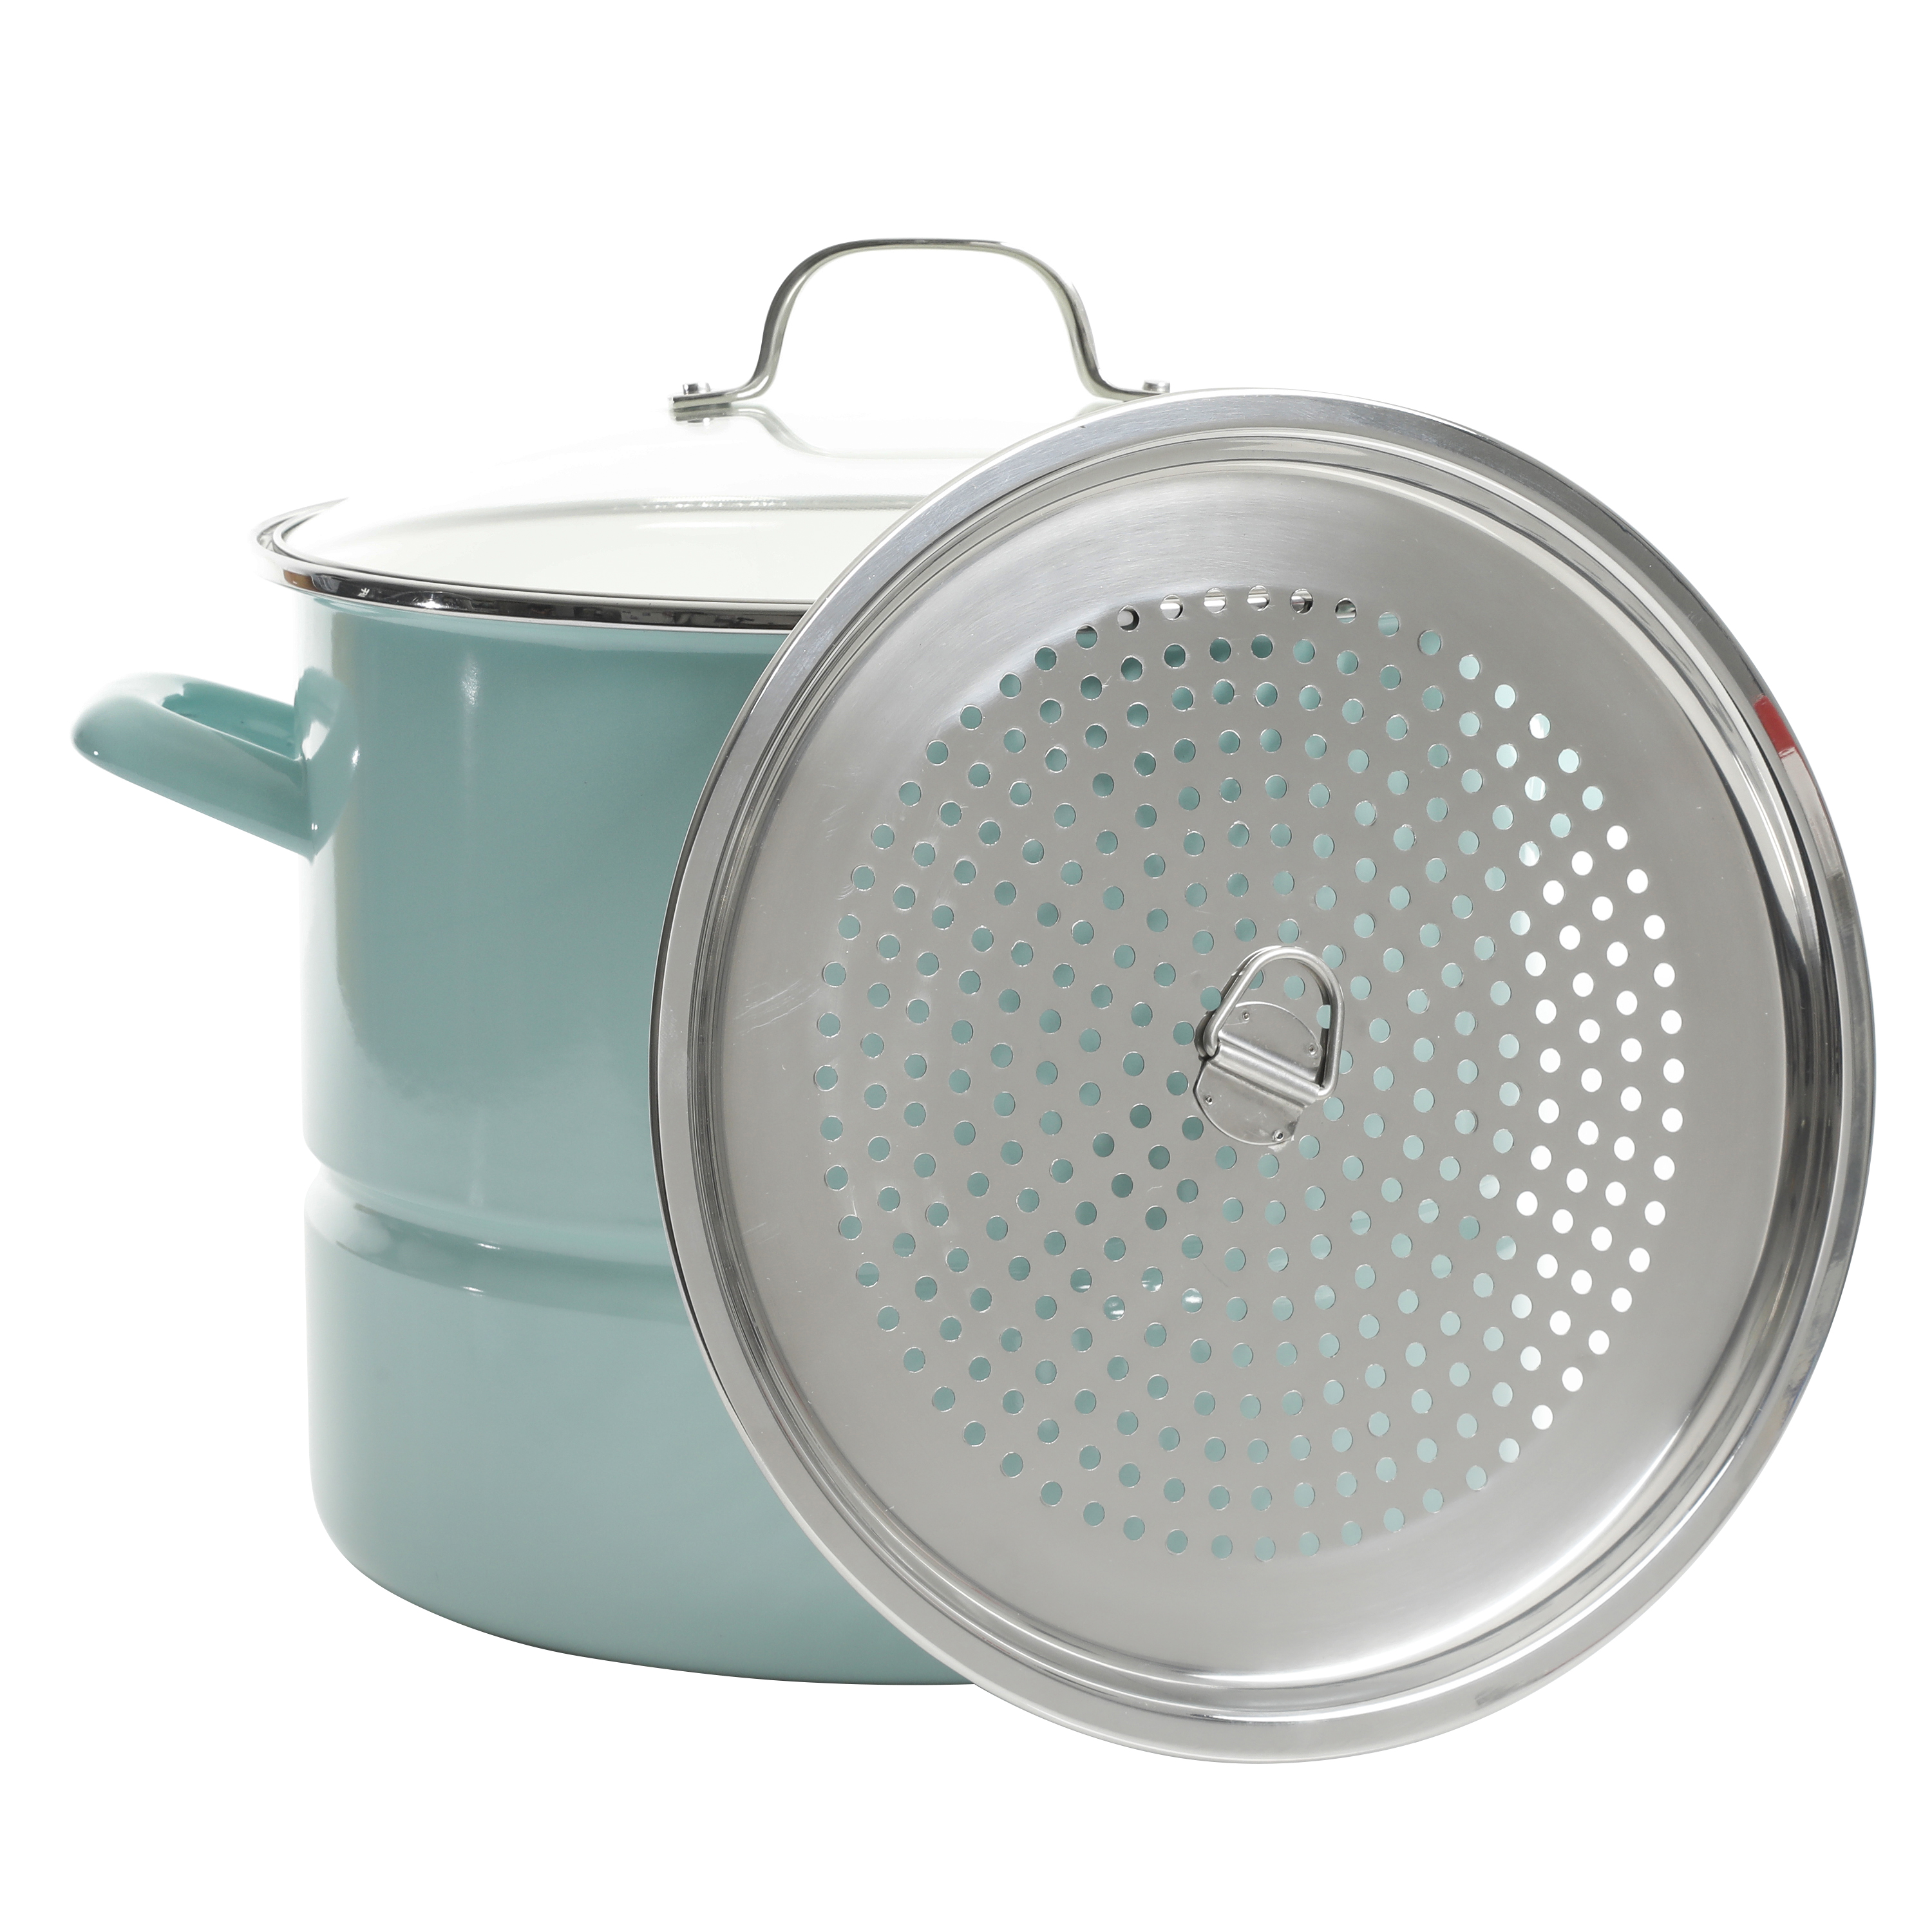 Kenmore Broadway Steamer Stock Pot with Insert and Lid, 16-Quart, Glacier Blue